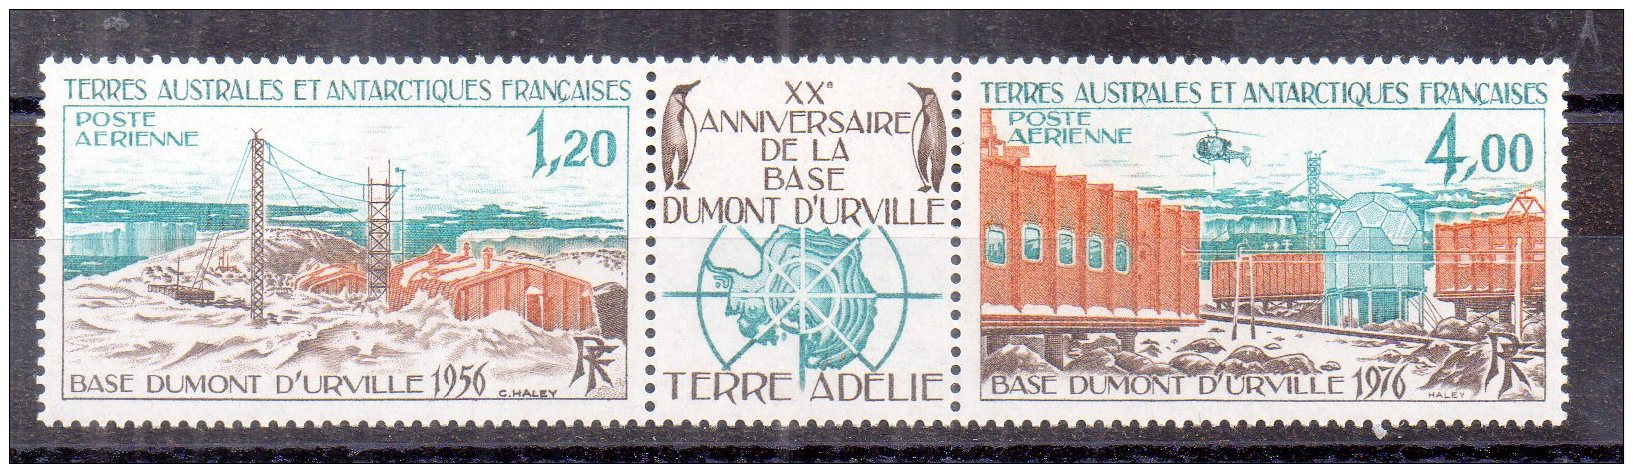 TAAF PA 42 Et 43 : 2 Timbres**. (TA059) - Neufs